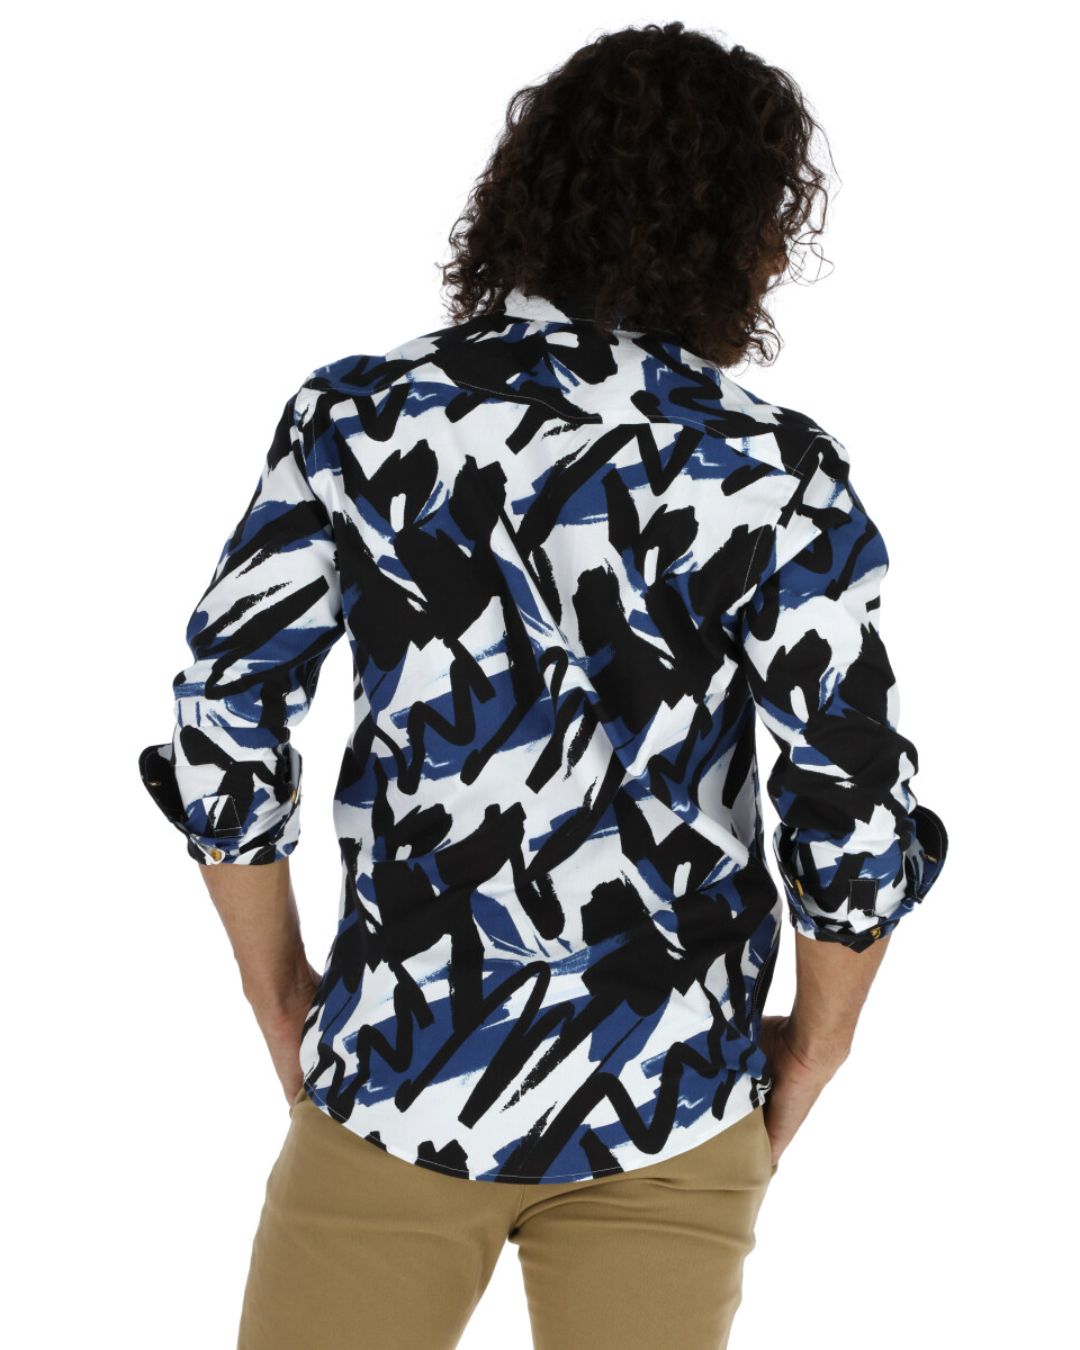 Men's Abstract Long Sleeve Button Down Shirt Black White & Blue